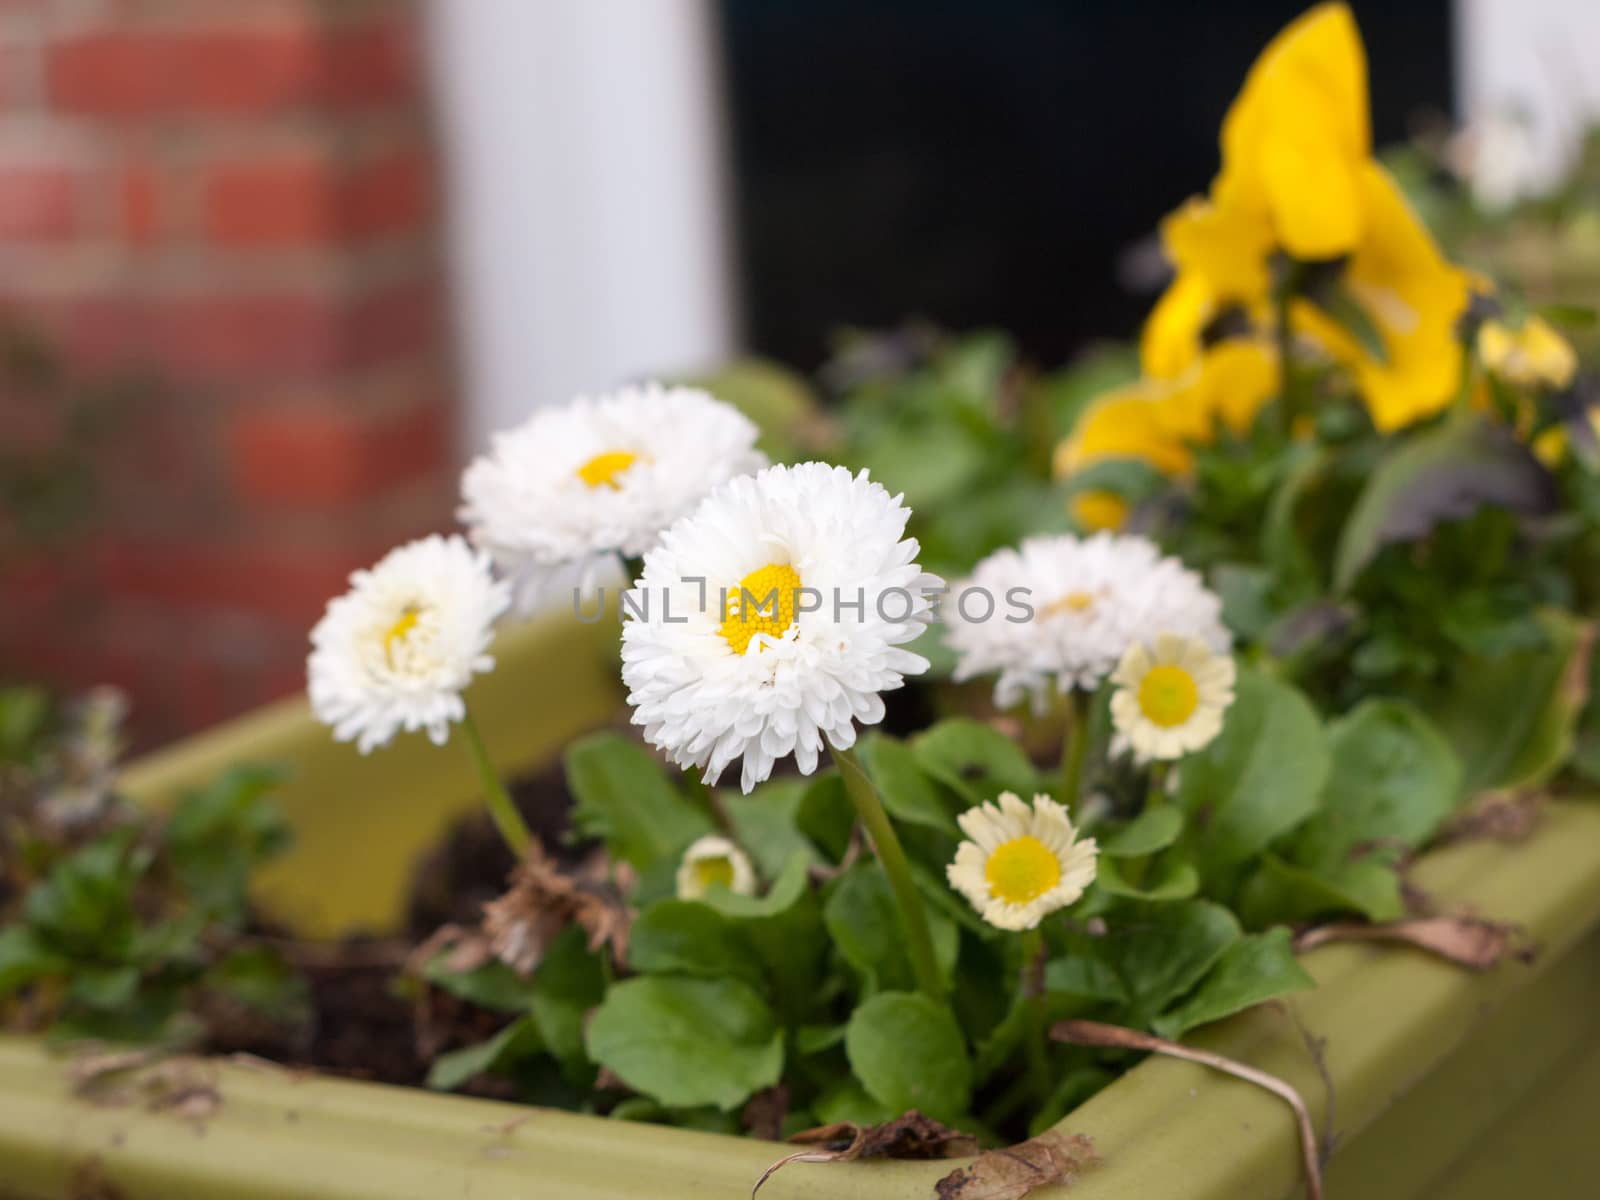 A plant pot with lovely white and fresh daisies